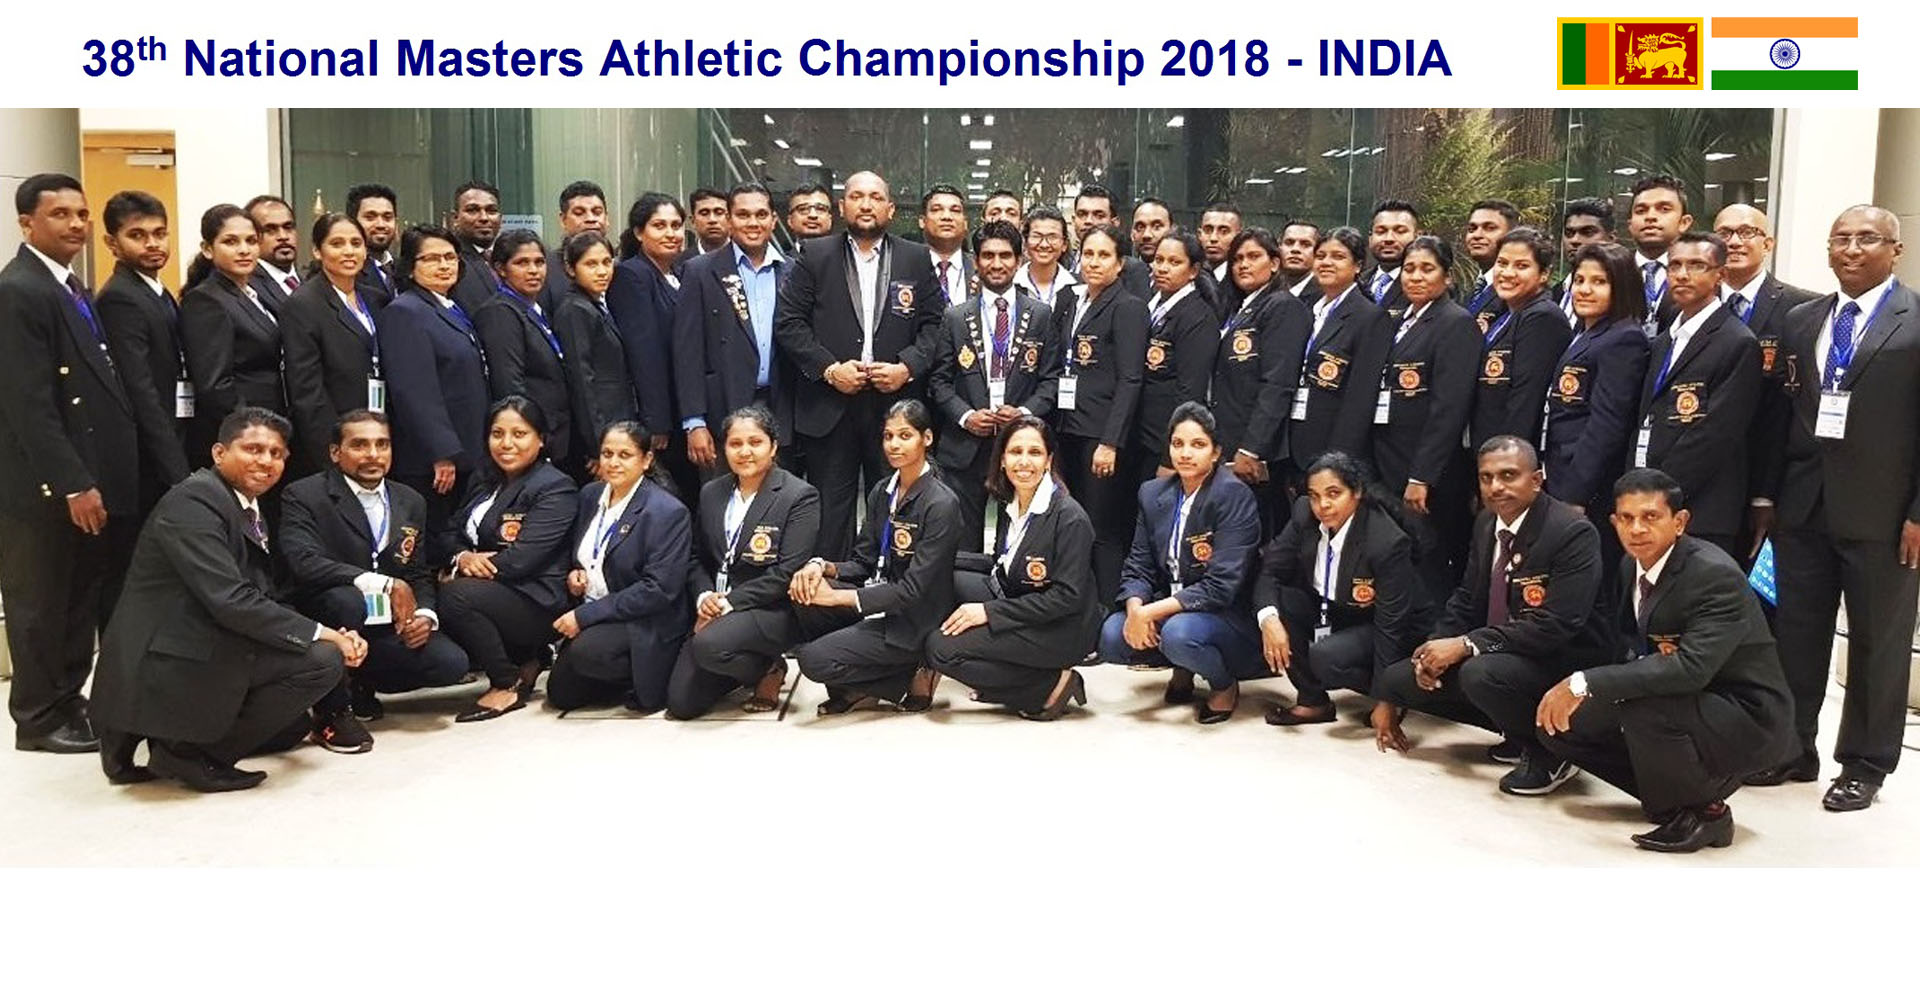 38th National Masters Athletic Championship - India